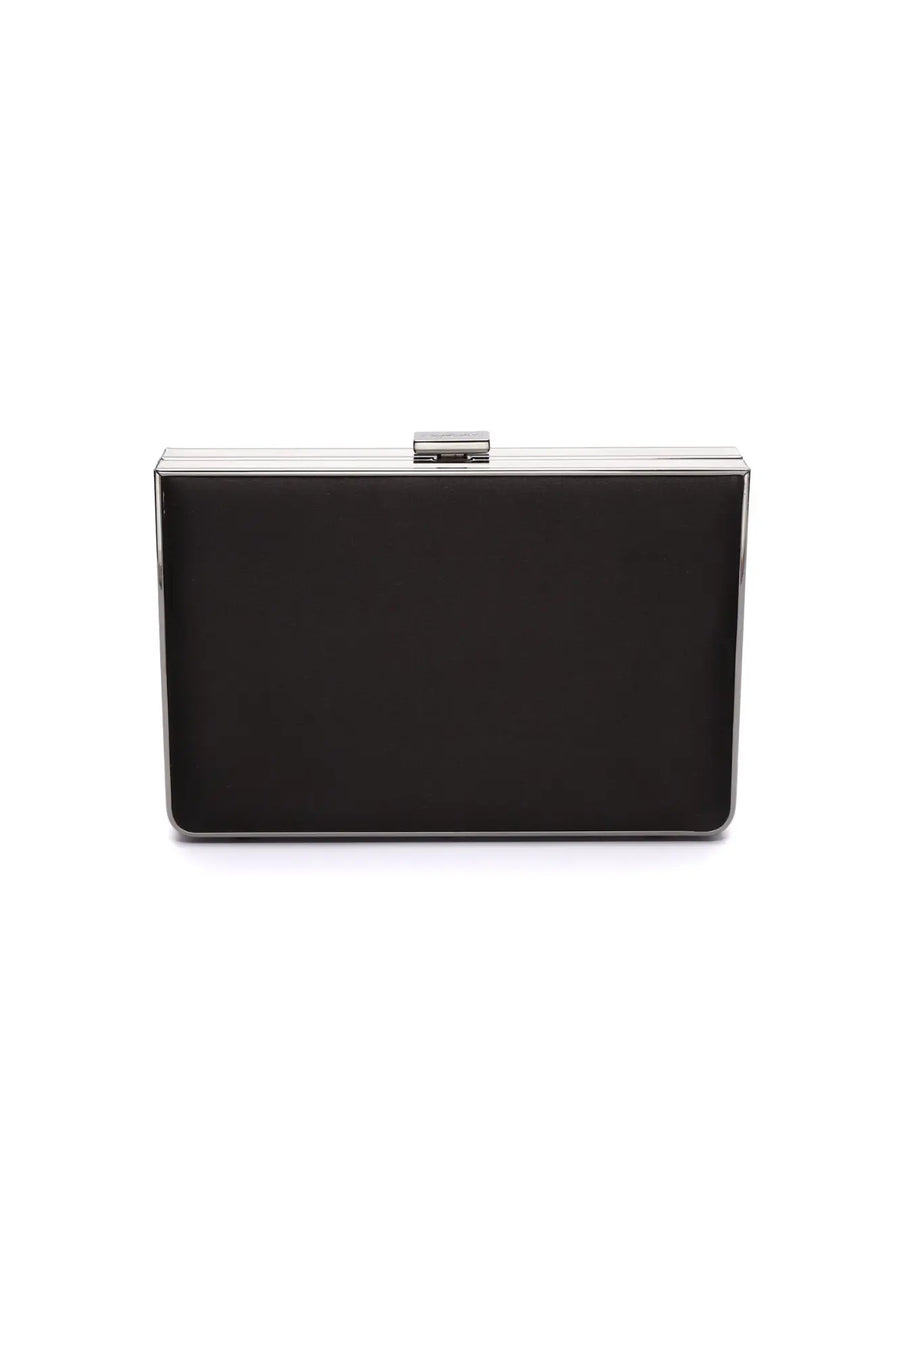 Bespoke Venezia Clutch x MICAELA - Black Leather with metallic clasp on a white background, embodying Italian sophistication by The Bella Rosa Collection.